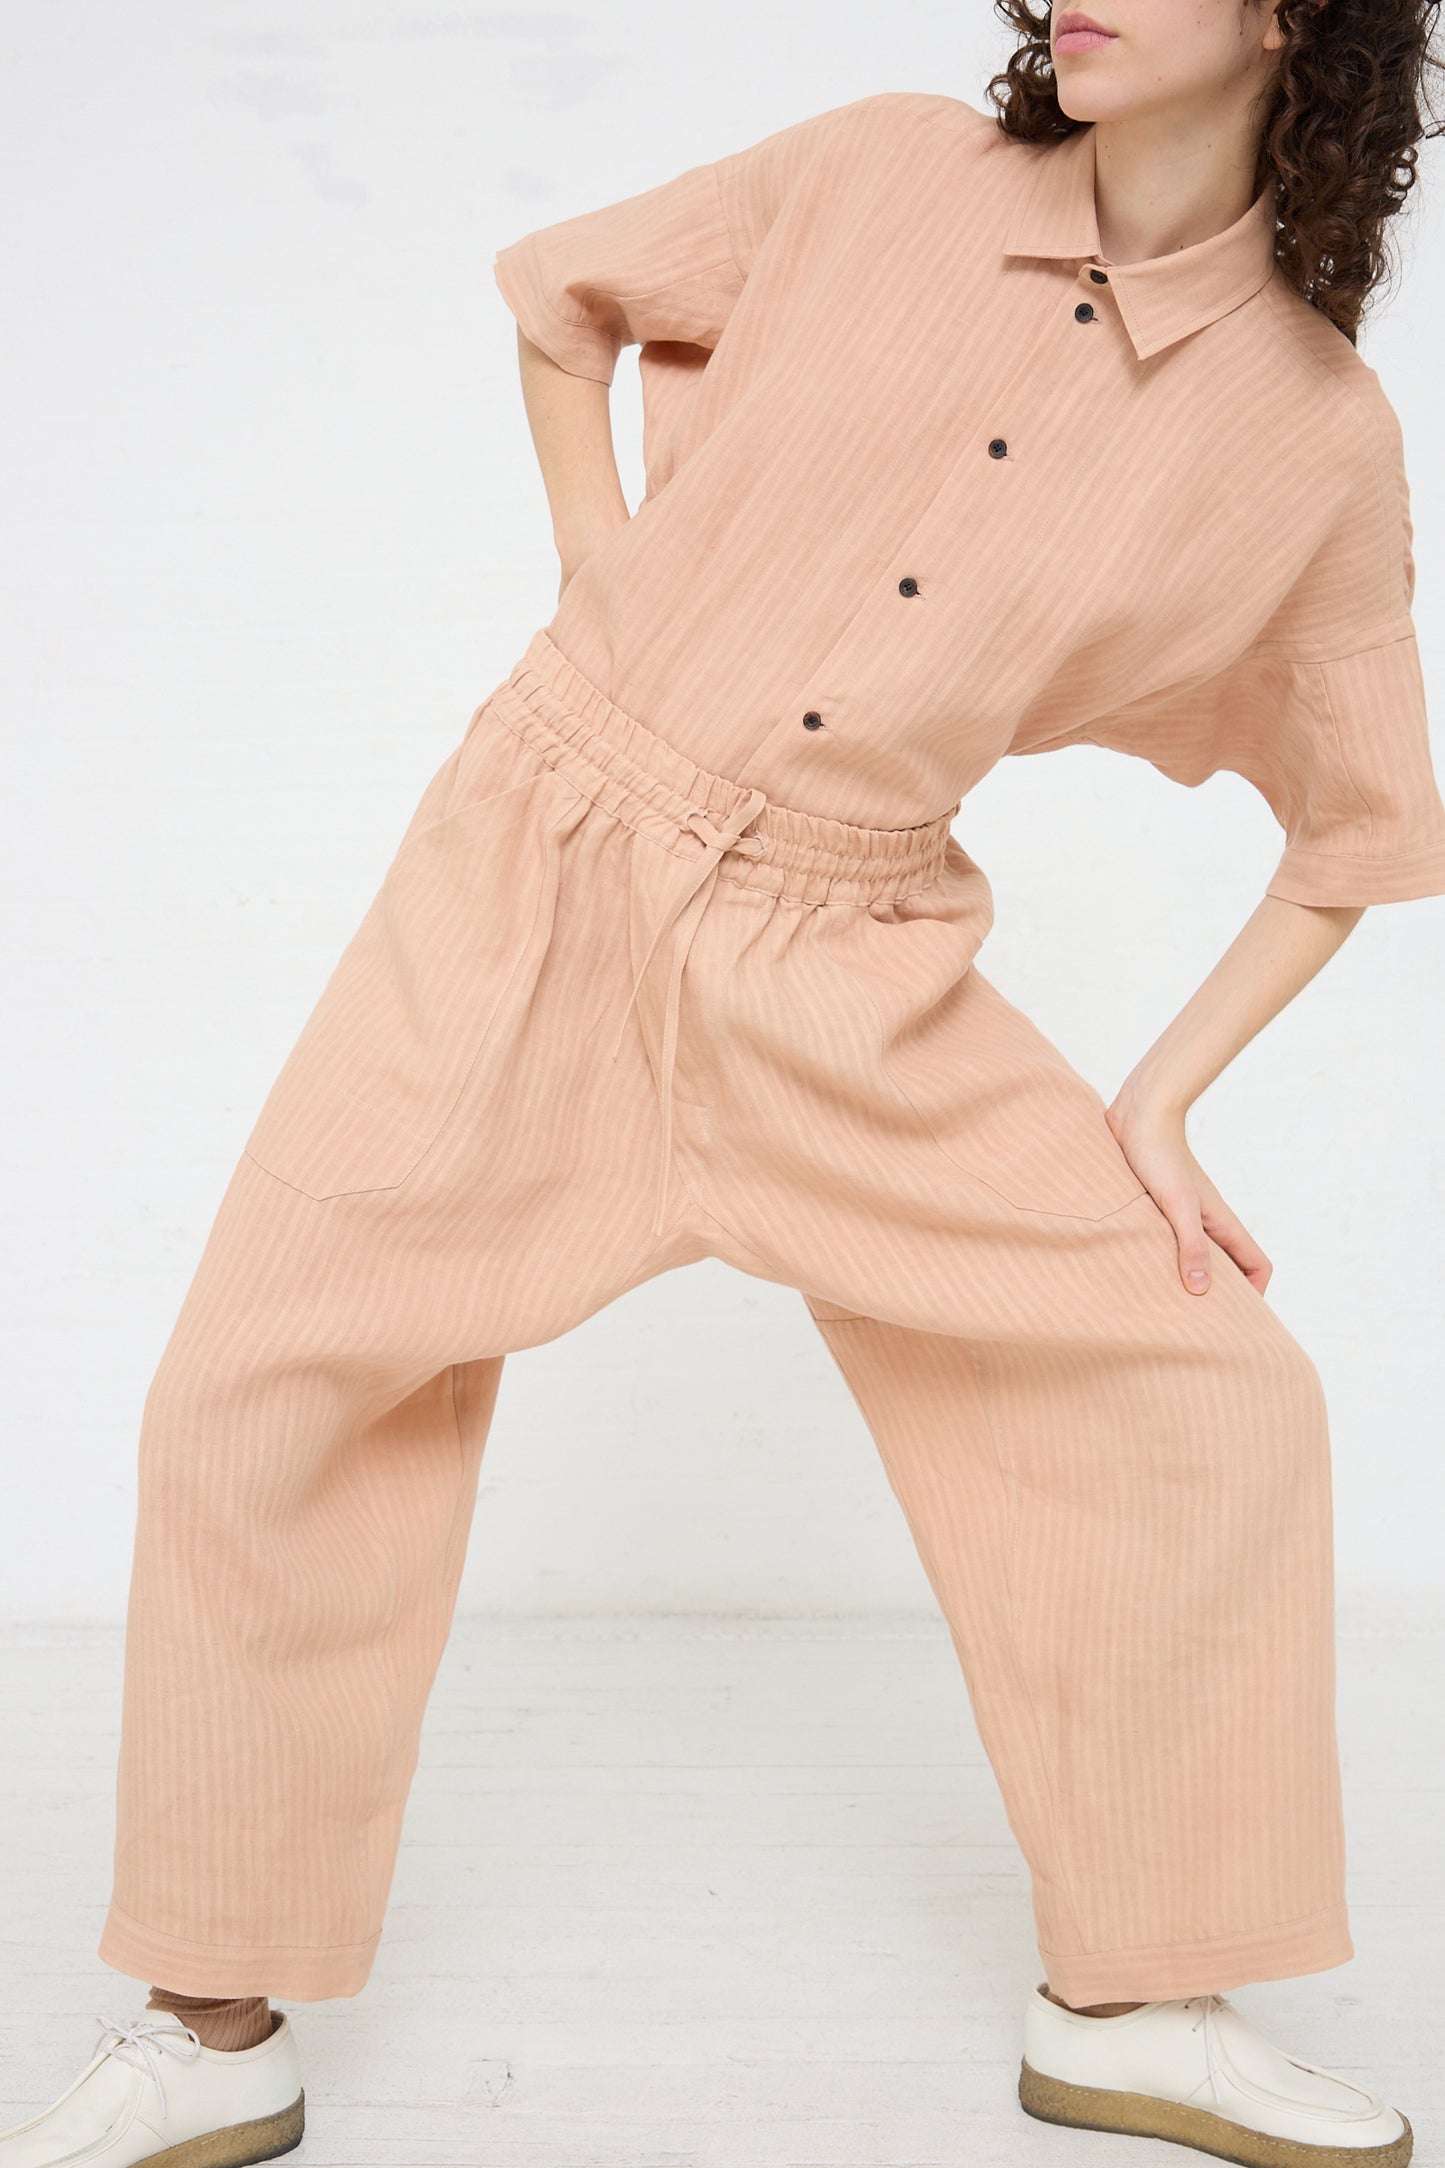 The model is wearing a Woven Linen Trouser in Ume by Jan-Jan Van Essche jumpsuit with elasticated waist.